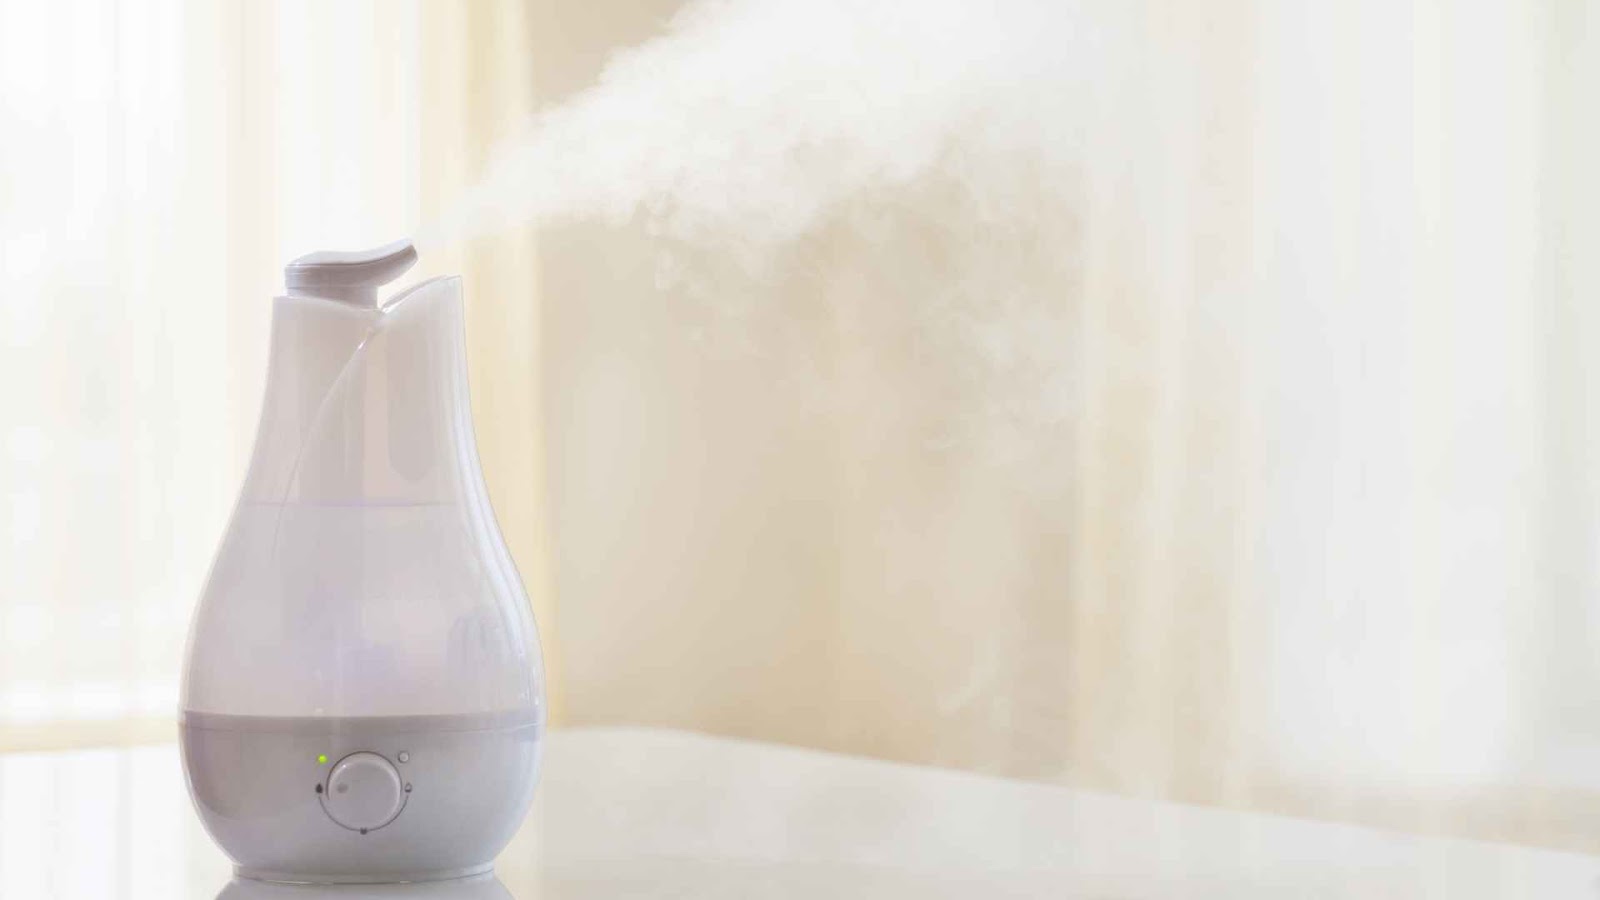 A humidifier can help prevent an eczema flare up